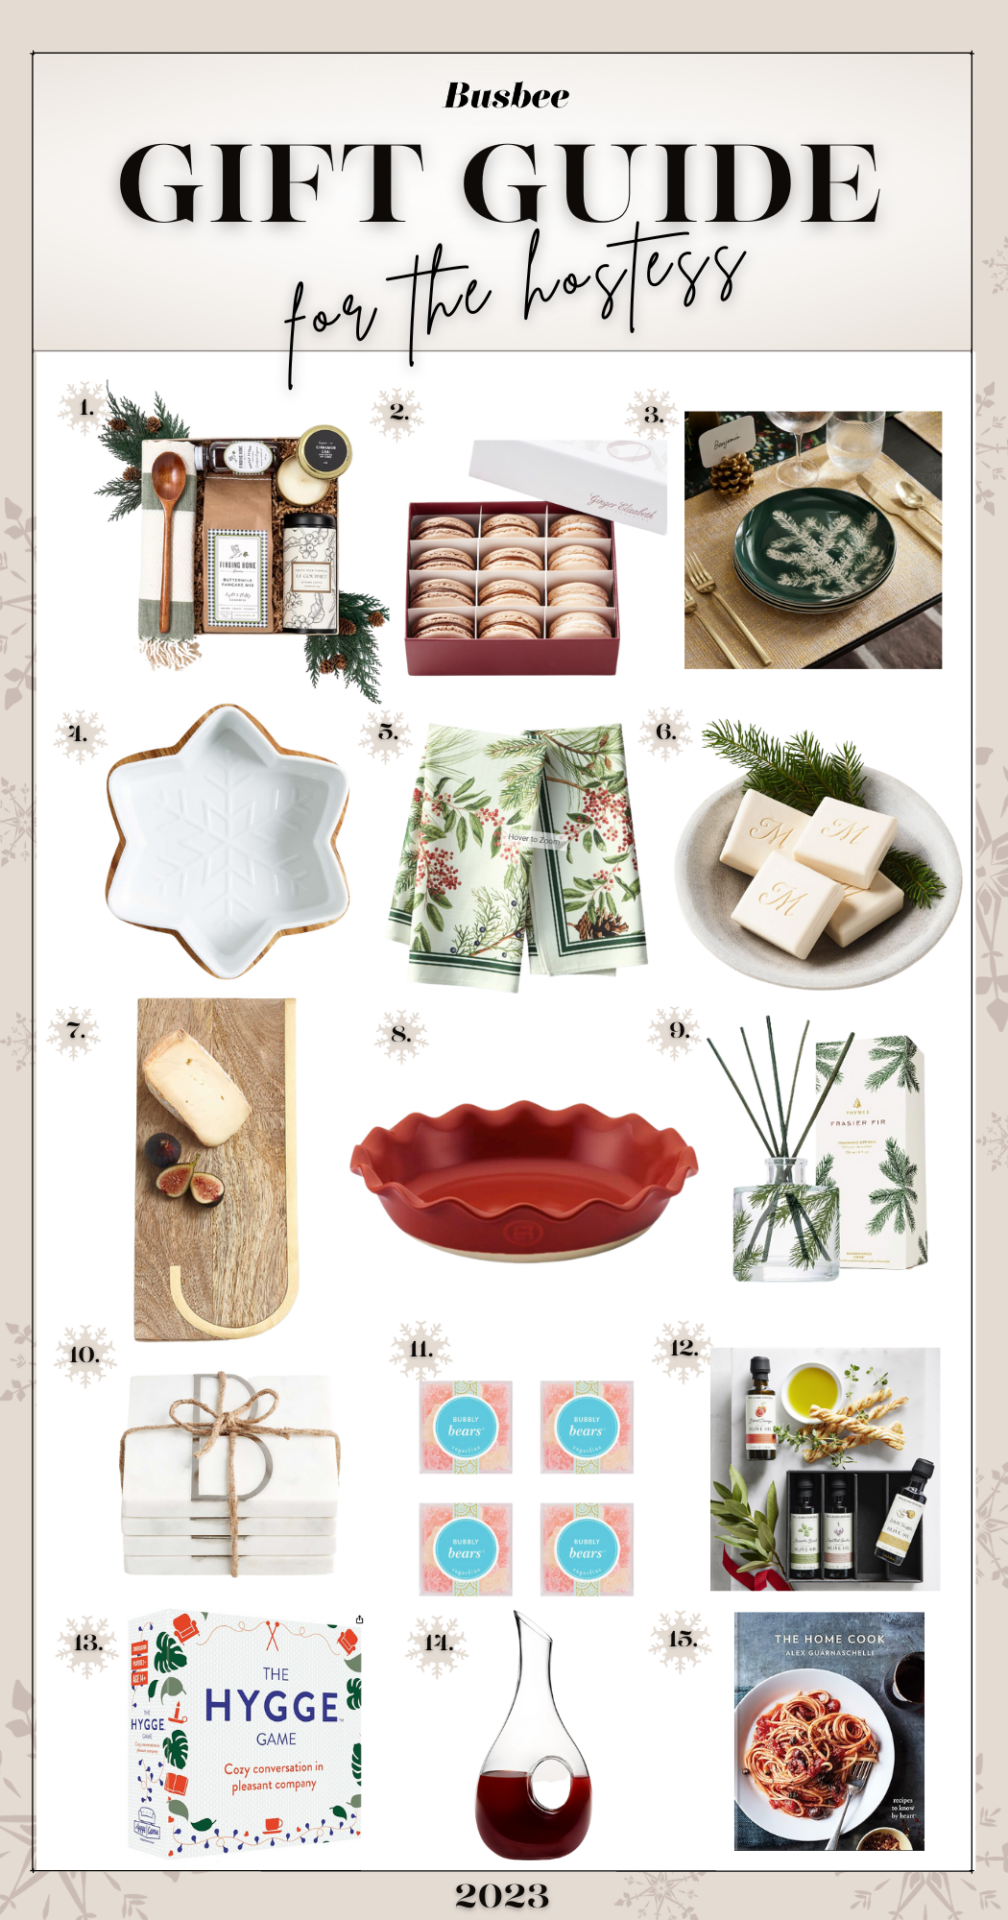 The Best Hostess Gifts for Fall - HomeGirl by Design